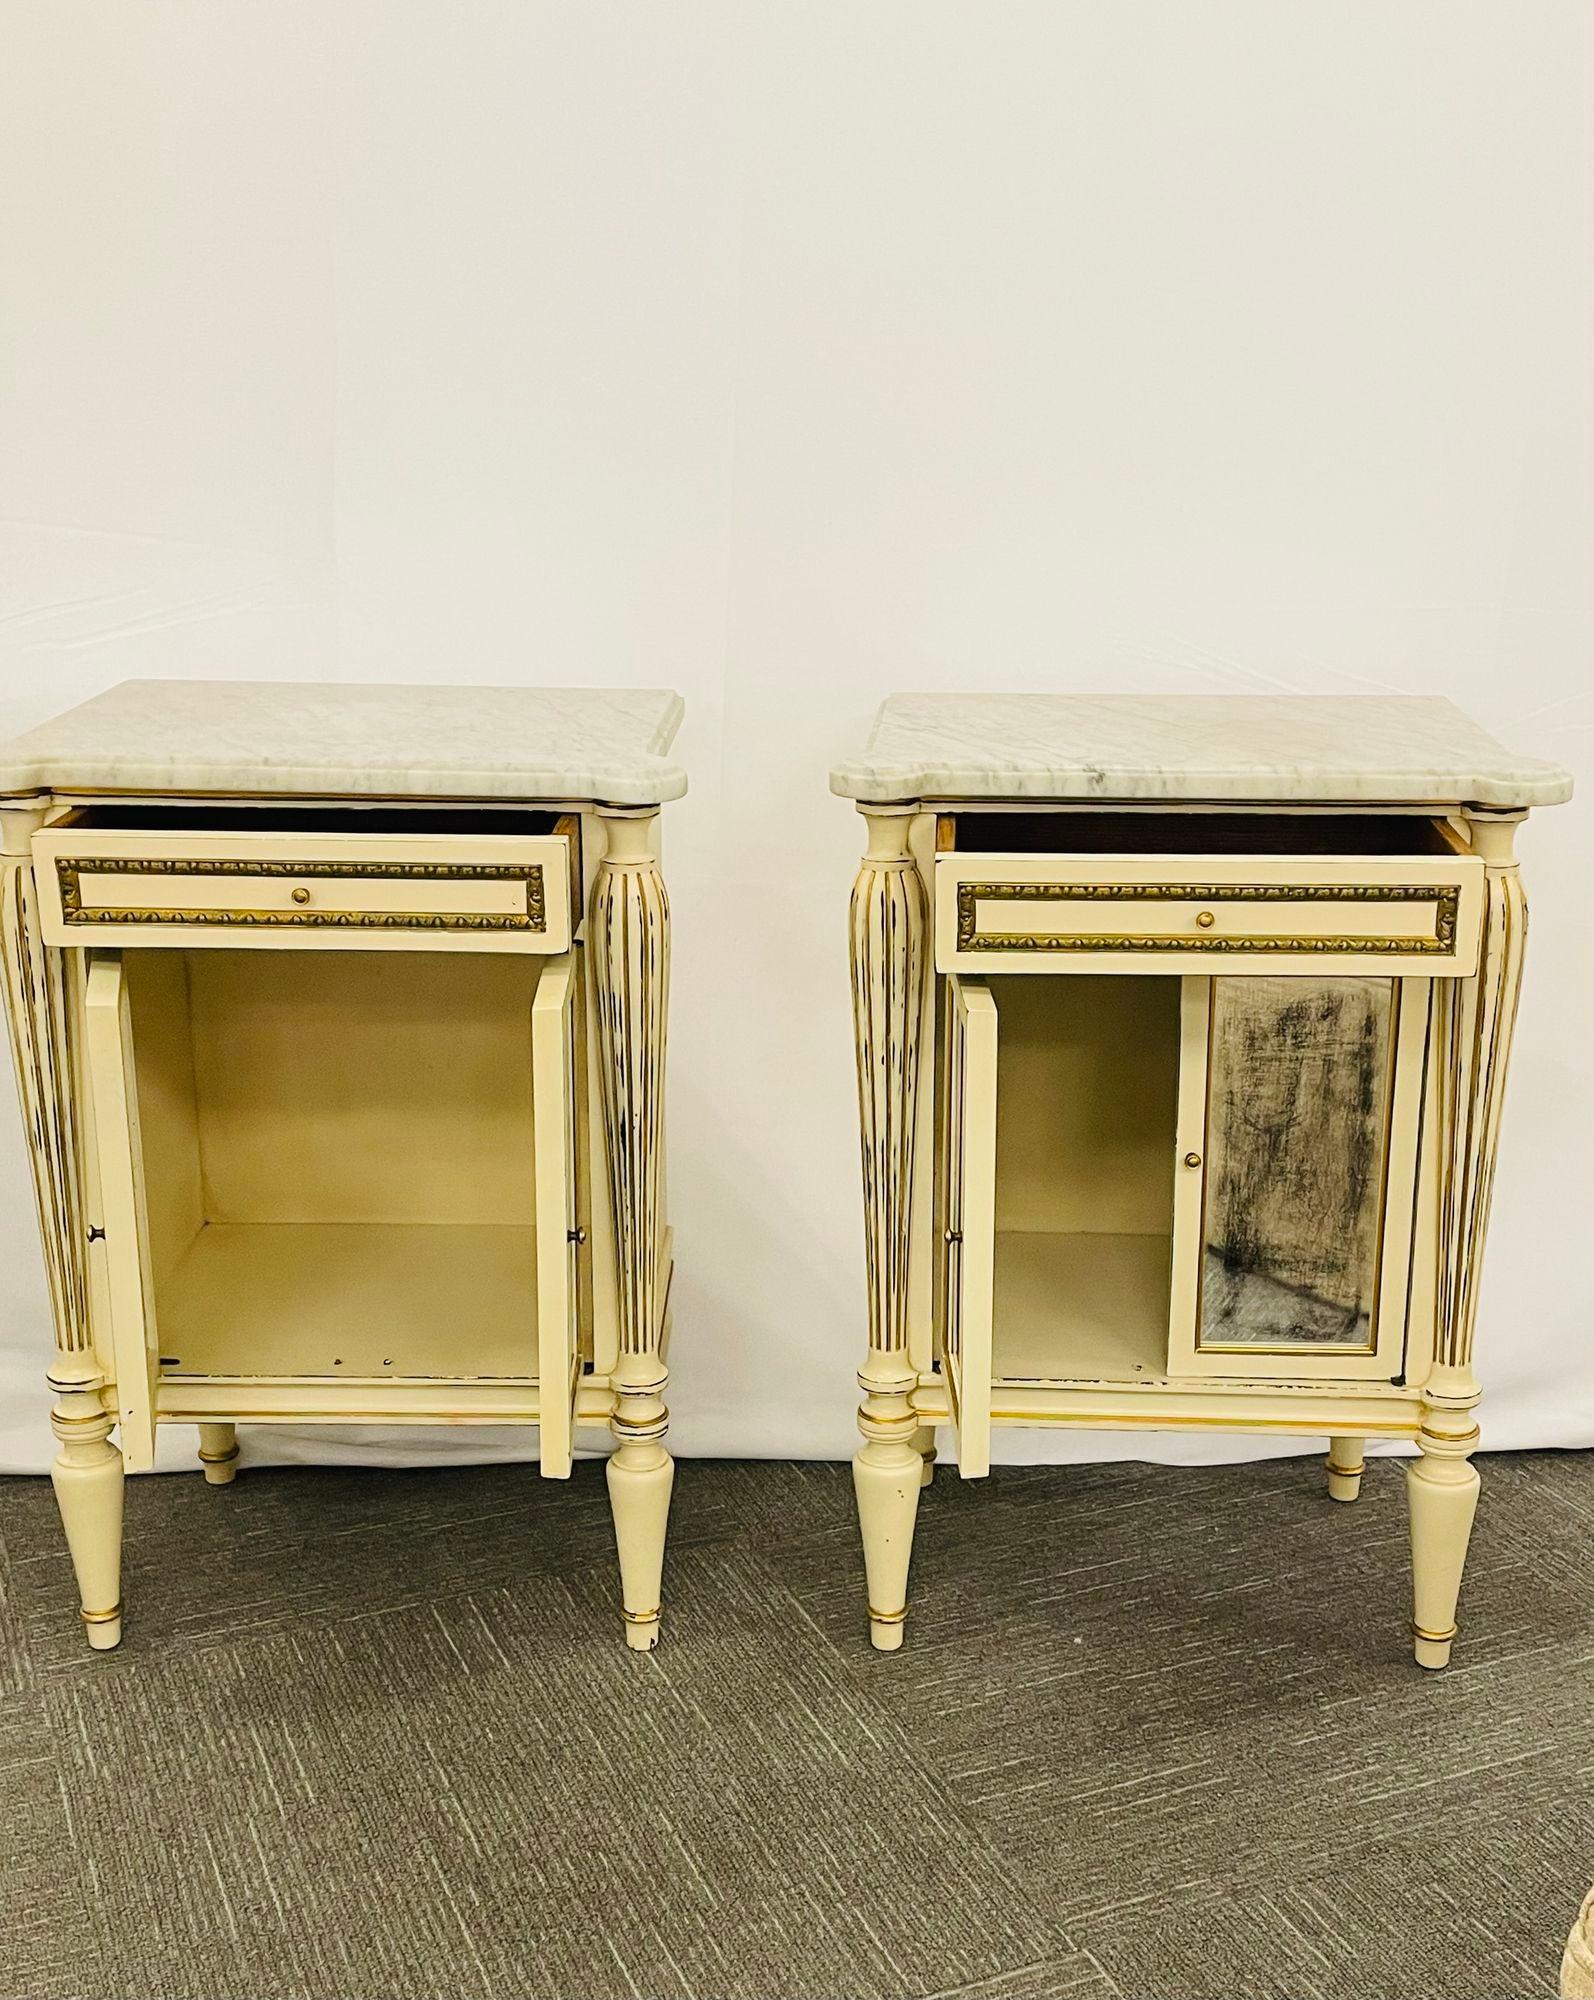 Argentine Pair White Painted Marble-Top End Tables Distressed Mirrored Cabinets by Jansen